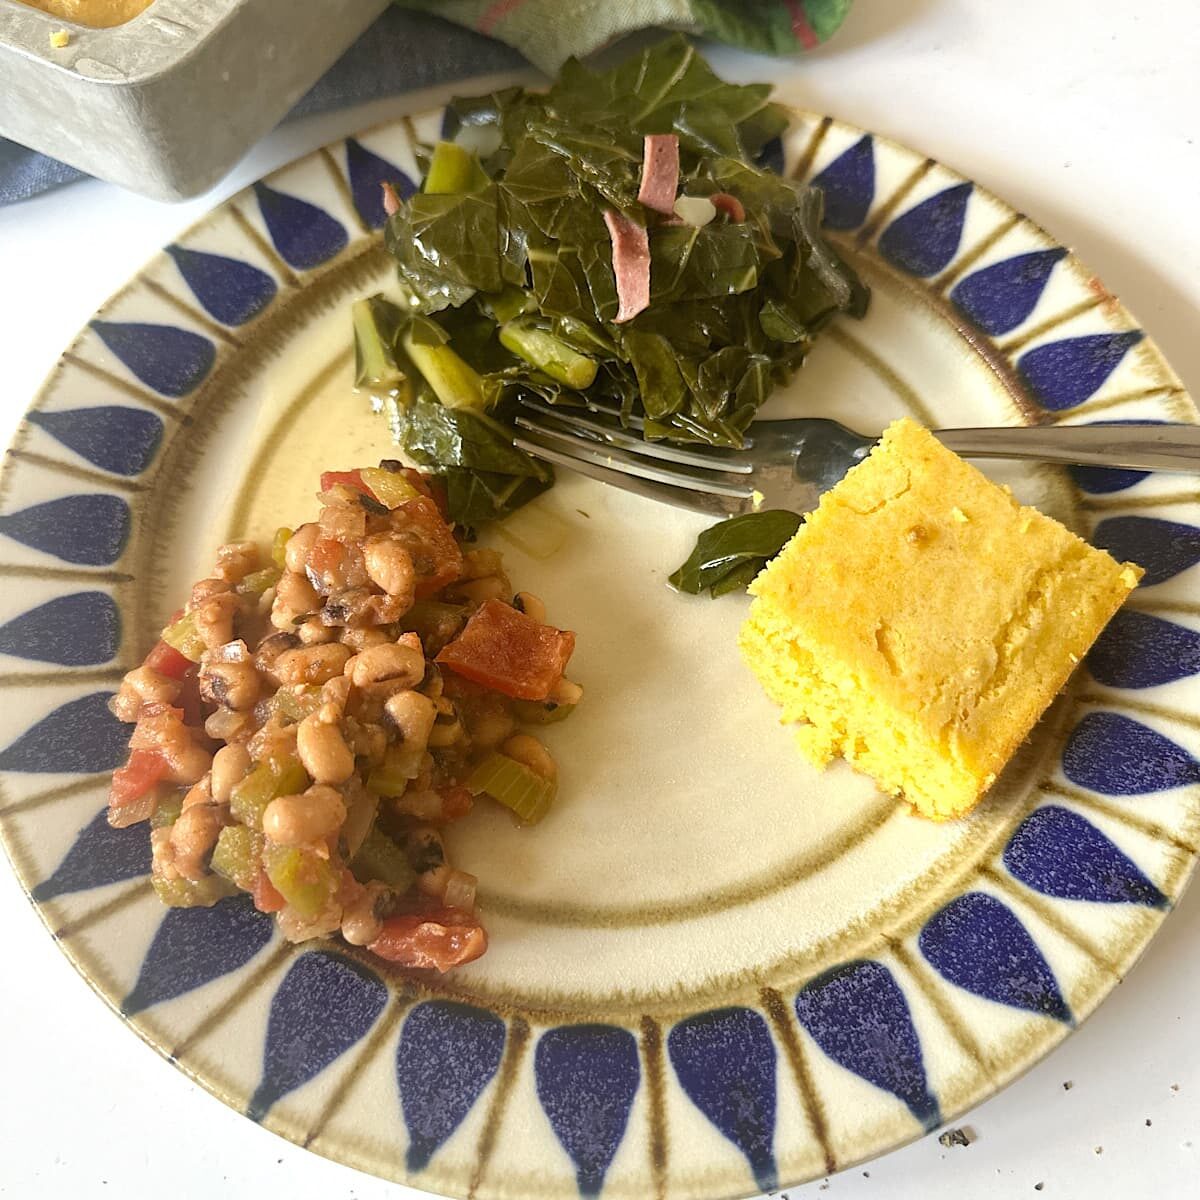 Picture of Creole black eyed peas, collard greens, and cornbread.